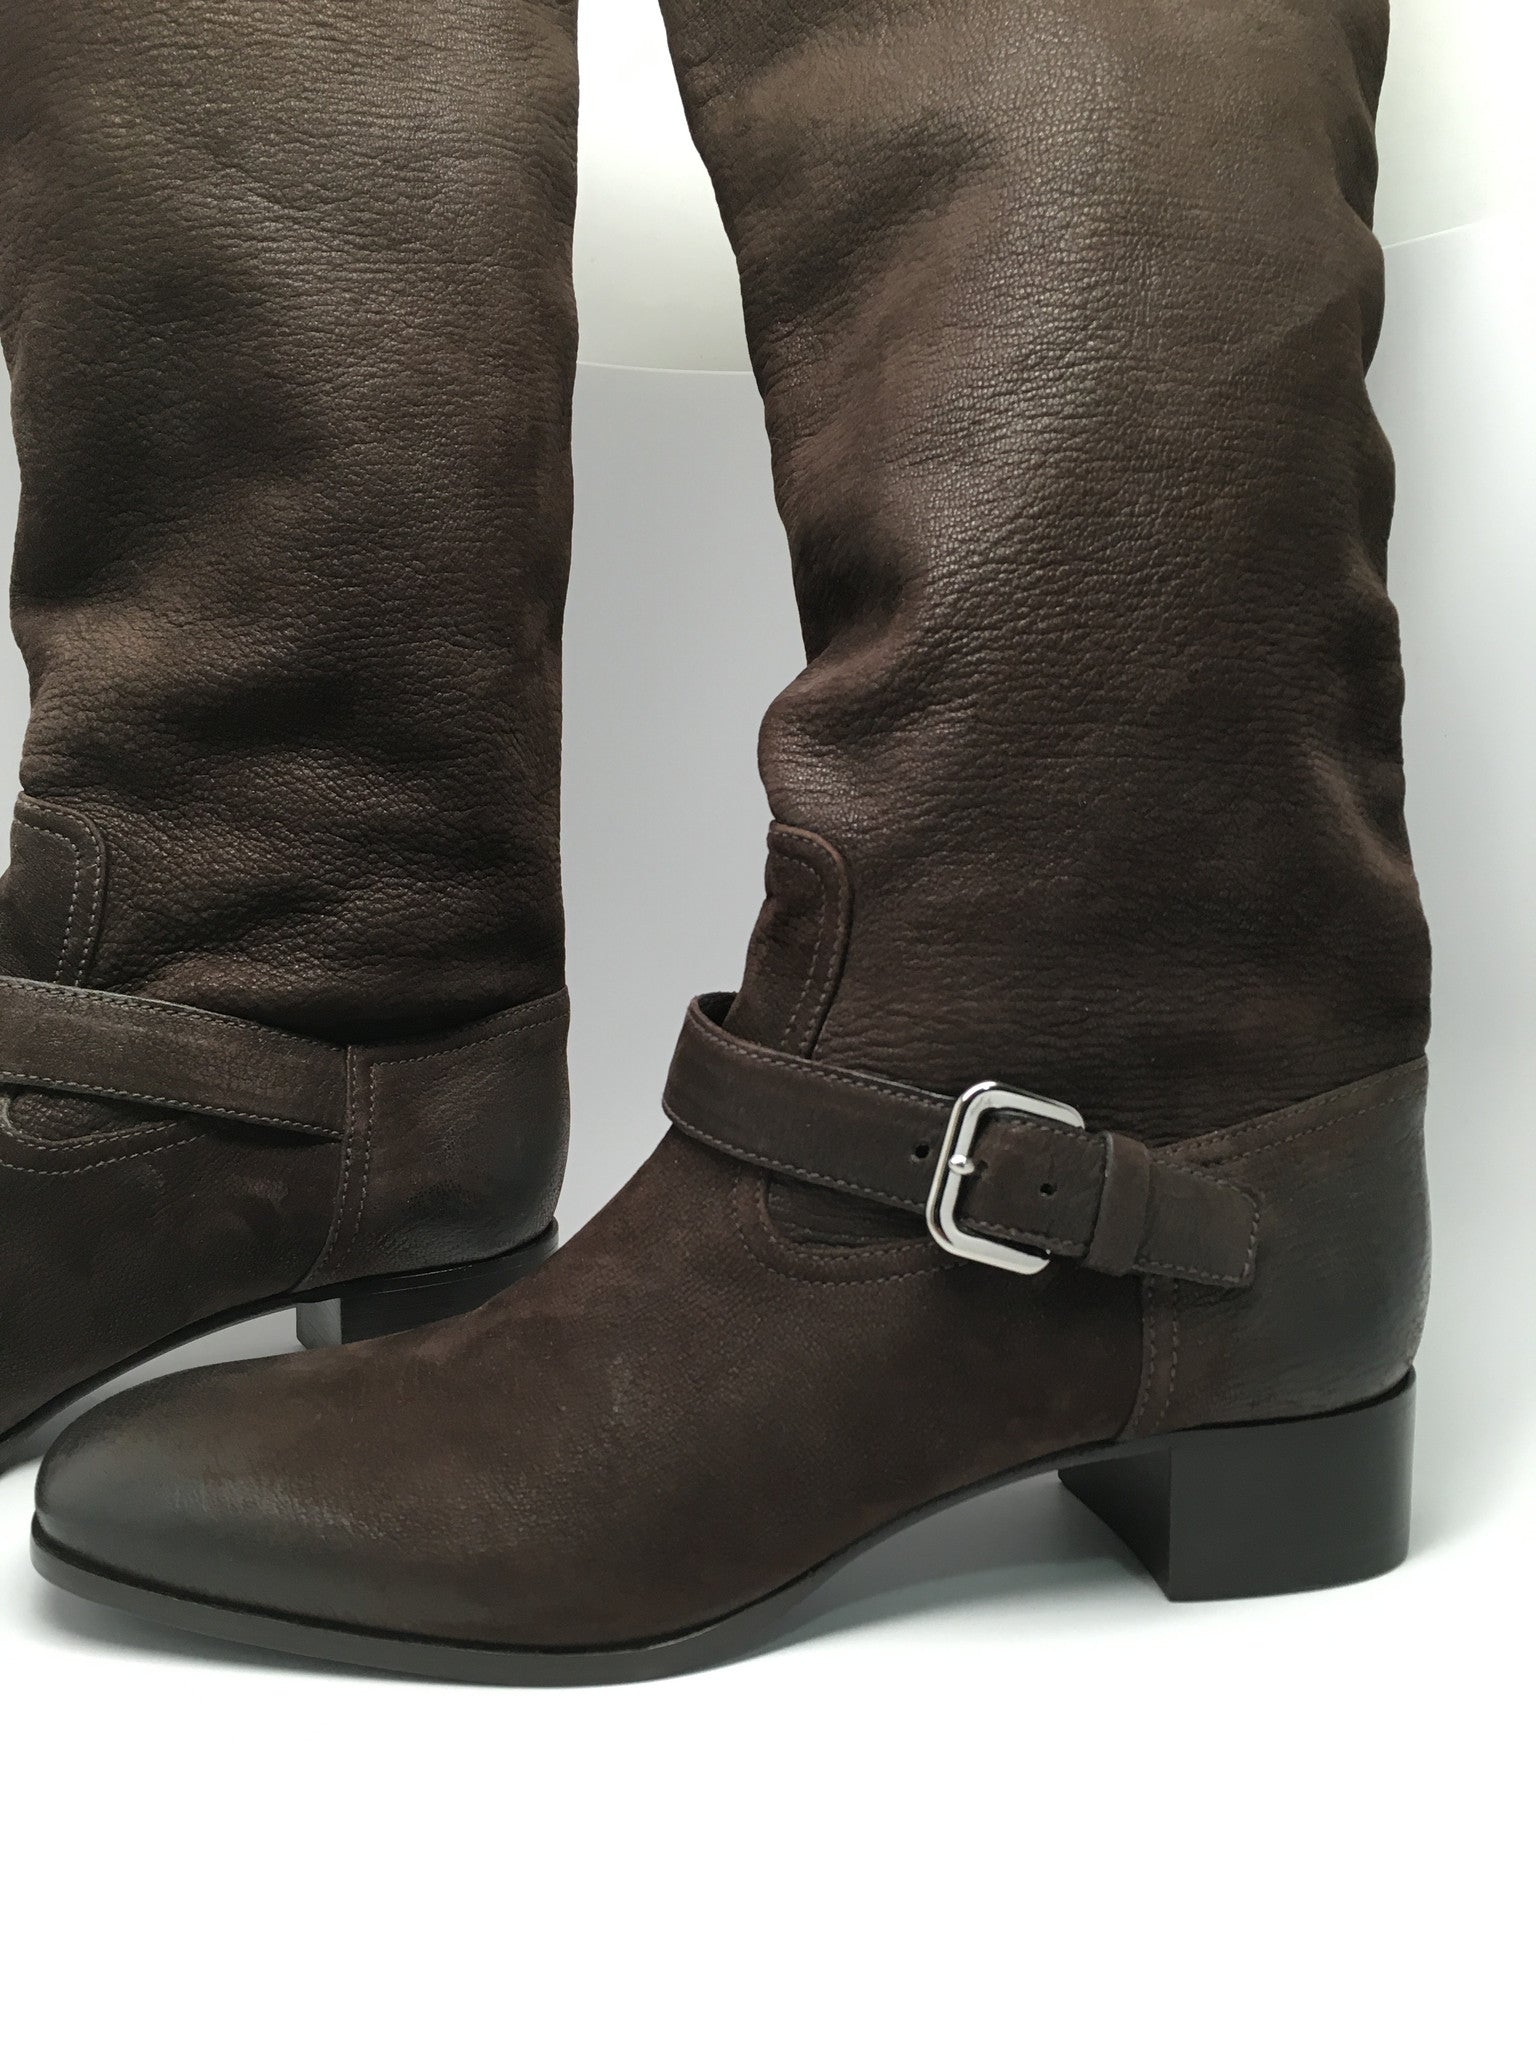 NEW PRADA CALZATURE DONNA CAPRA ANTIC 2 BROWN LEATHER BOOTS SIZE 39 –  Hebster Boutique